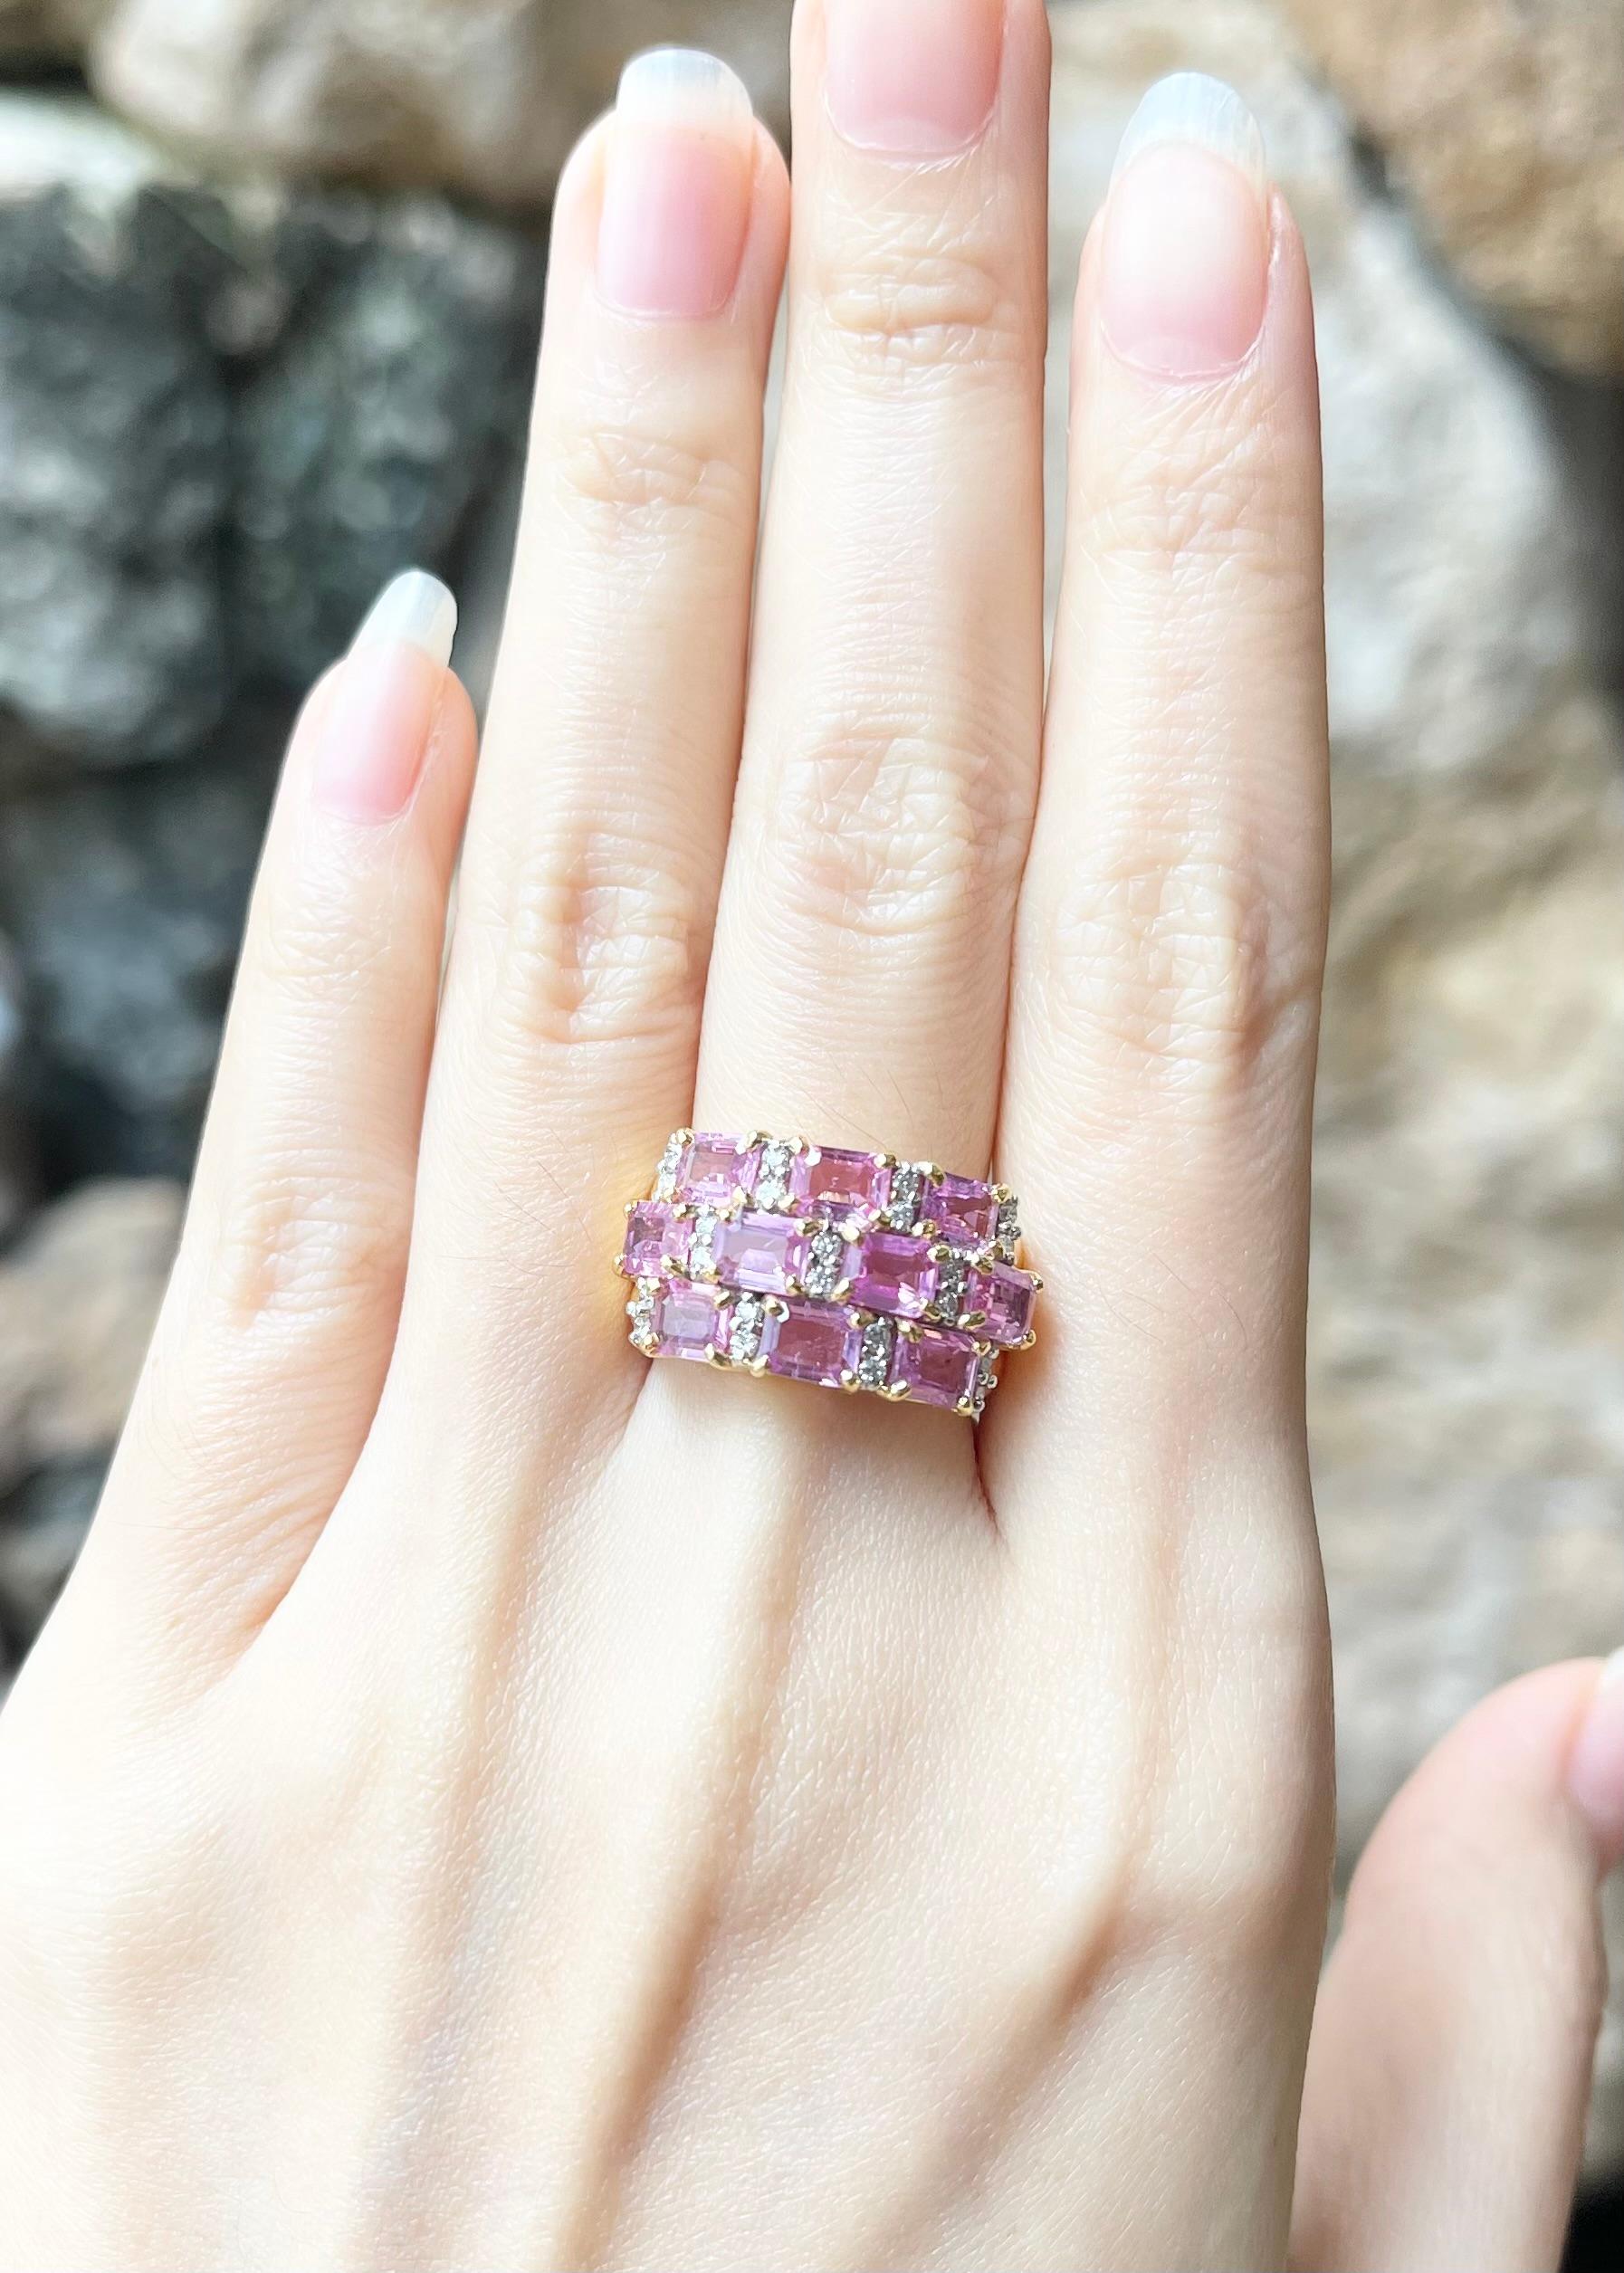 Pink Sapphire 4.25 carats with Diamond 0.24 carat Ring set in 18k Gold Settings

Width:  2.0 cm 
Length: 1.2 cm
Ring Size: 53
Total Weight: 12.48 grams

